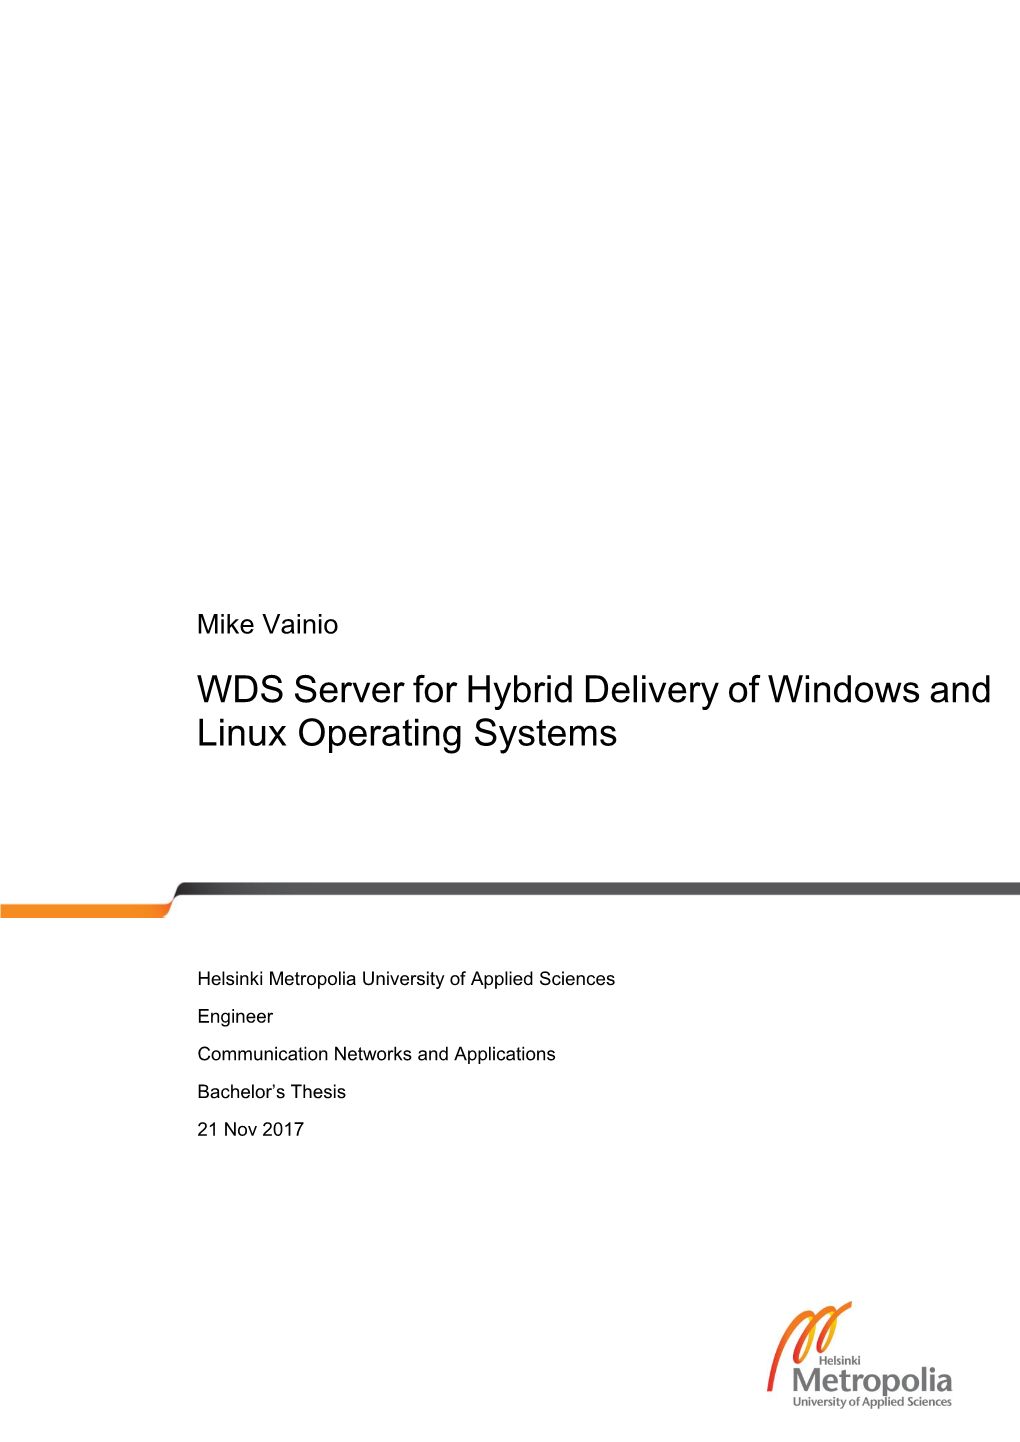 WDS Server for Hybrid Delivery of Windows and Linux Operating Systems Number of Pages 37 Pages + 1 Appendixes Date 21 Nov 2017